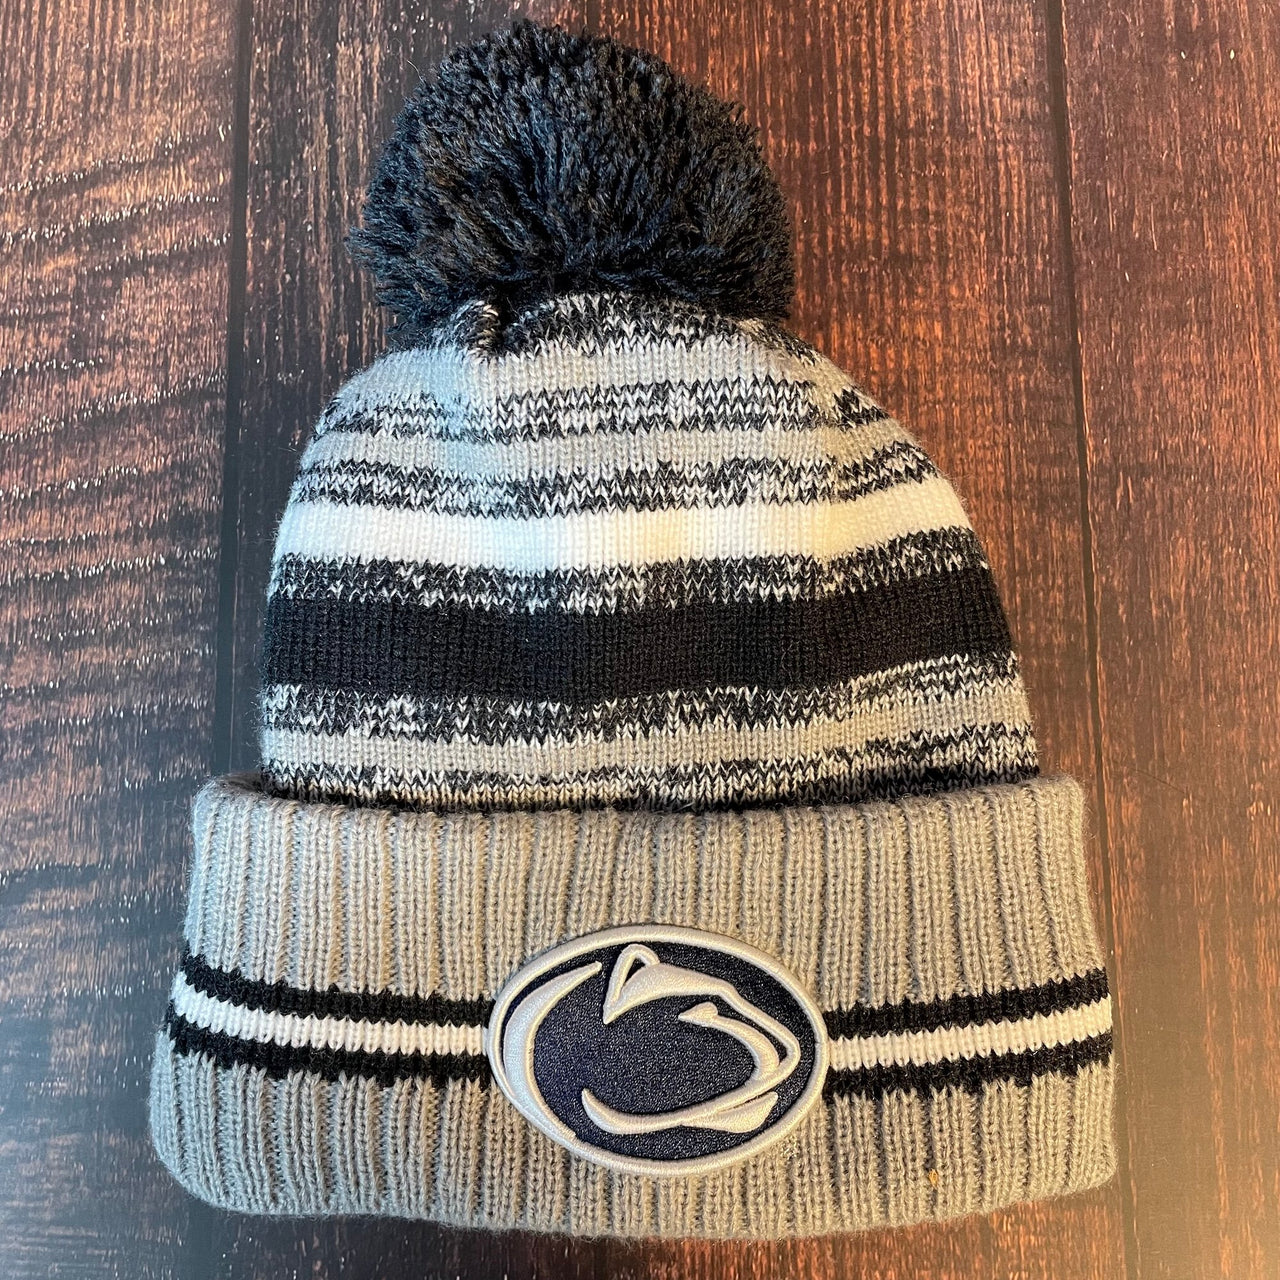 The front of the Penn State Nittany Lions 2022 Youth Beanie features a Penn State Nittany Lions logo at the front raised cuff